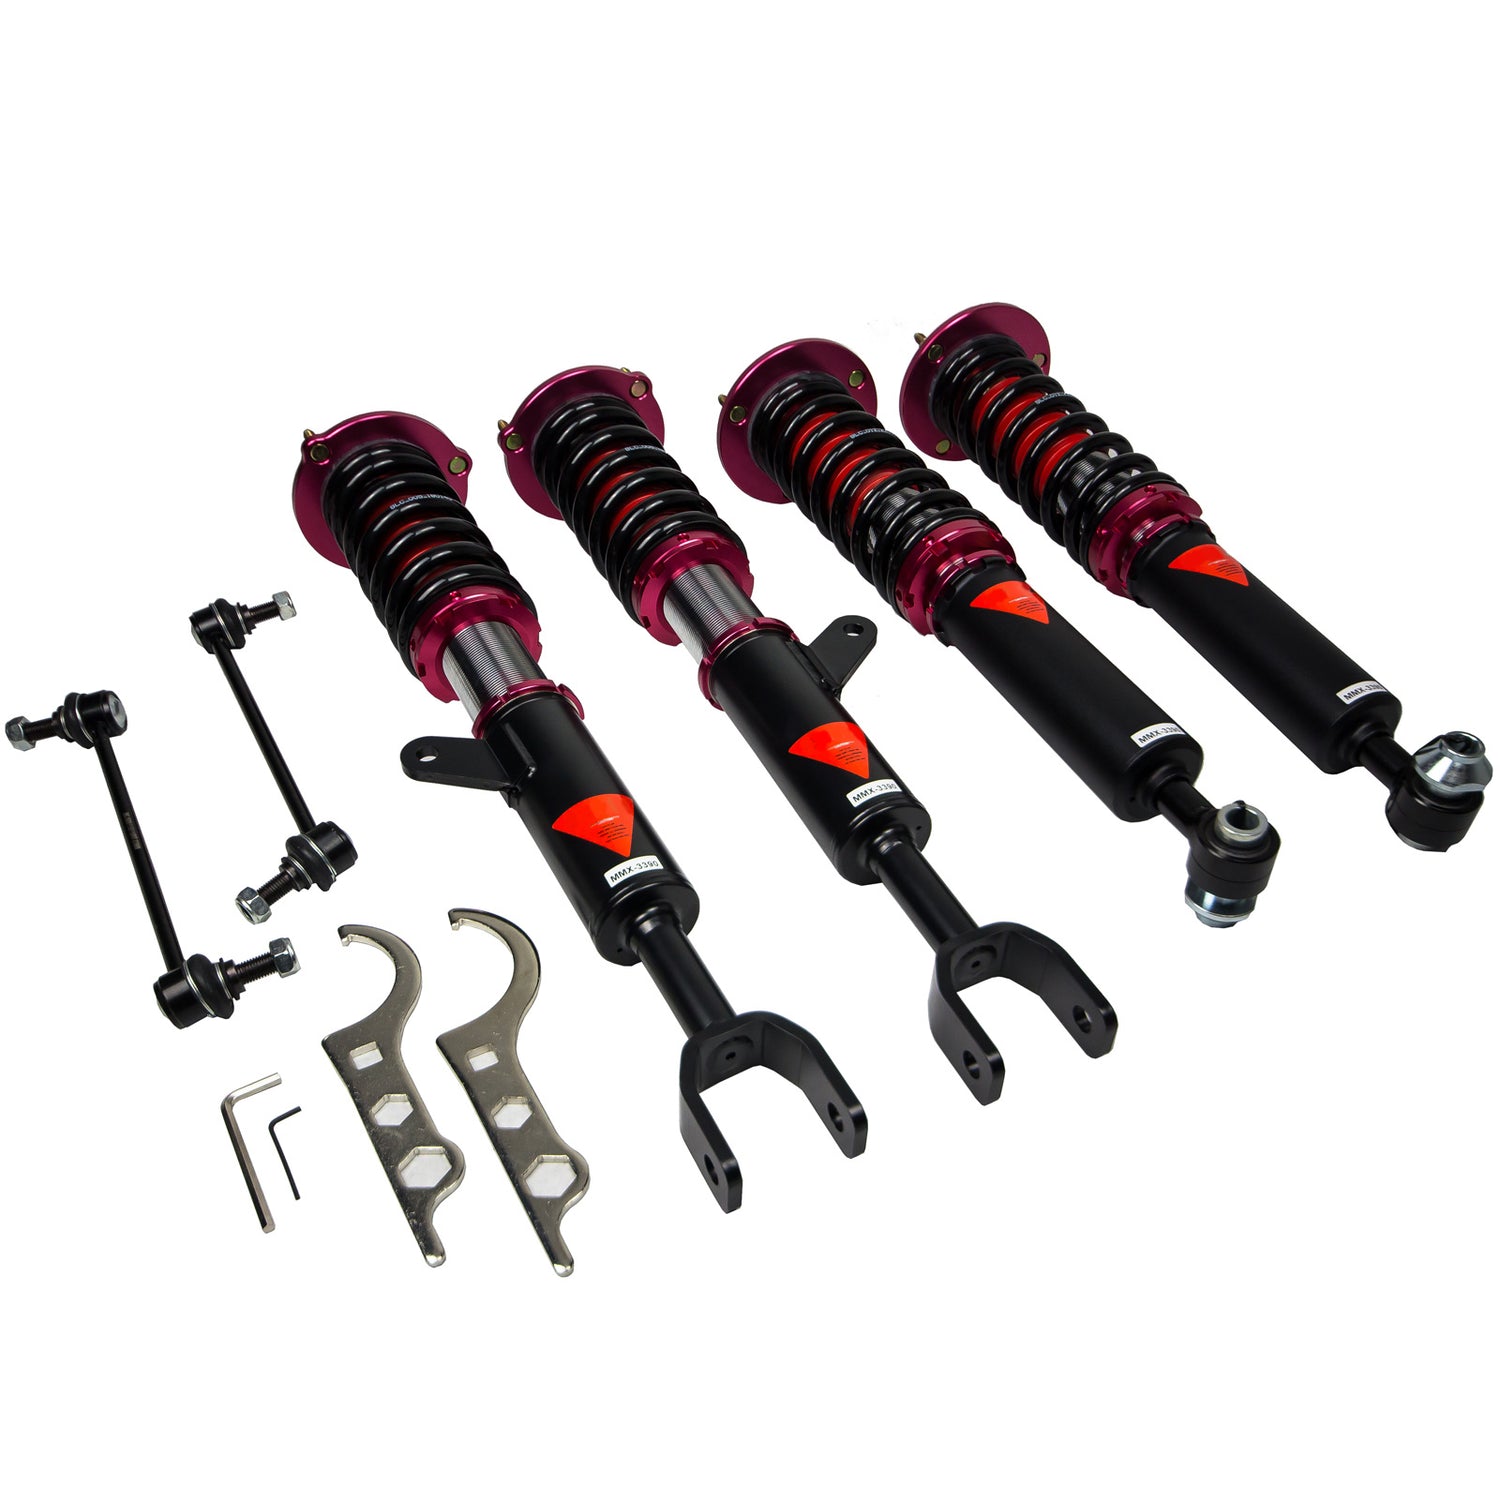 MMX3390-B MAXX Coilovers Lowering Kit, Fully Adjustable, Ride Height, 40 Clicks Rebound Settings, BMW 6-Series Gran Coupe(F06/F12/F13) RWD 2013-18